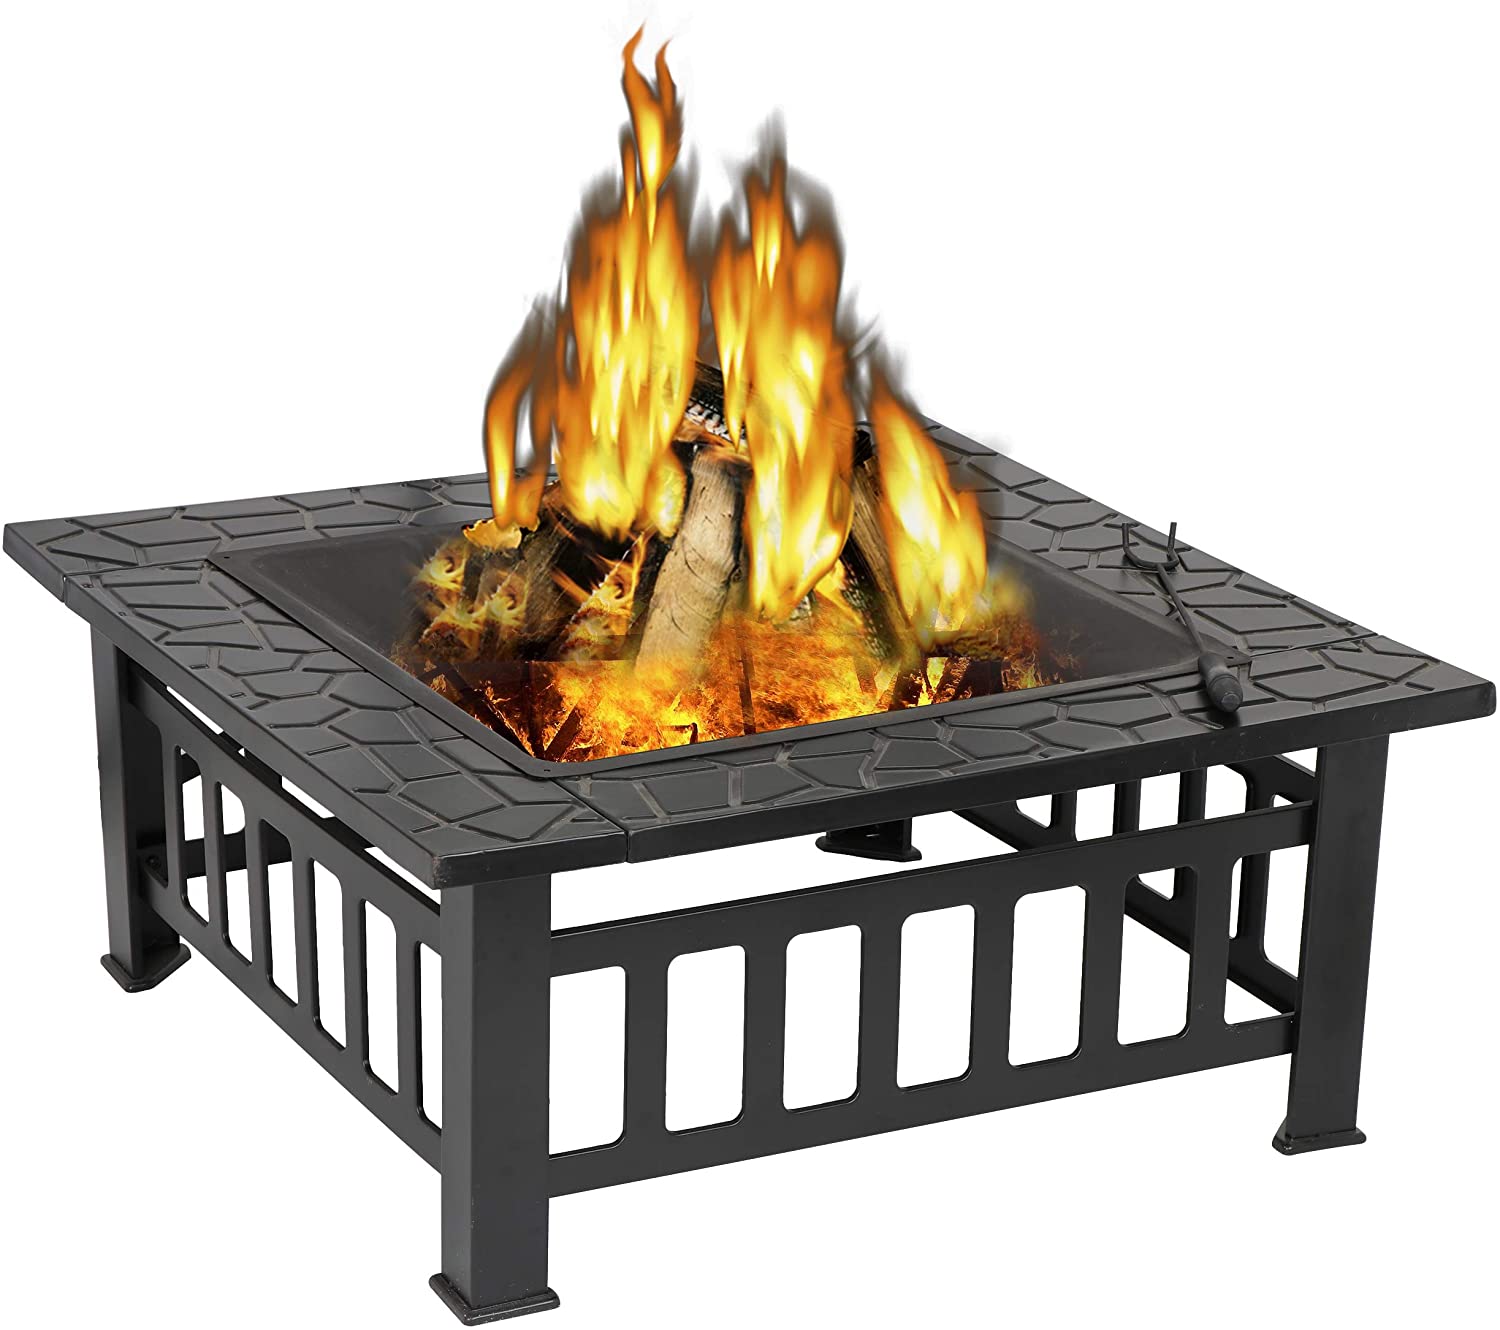 ZENY Square Patio Fire Pit, 32-Inch